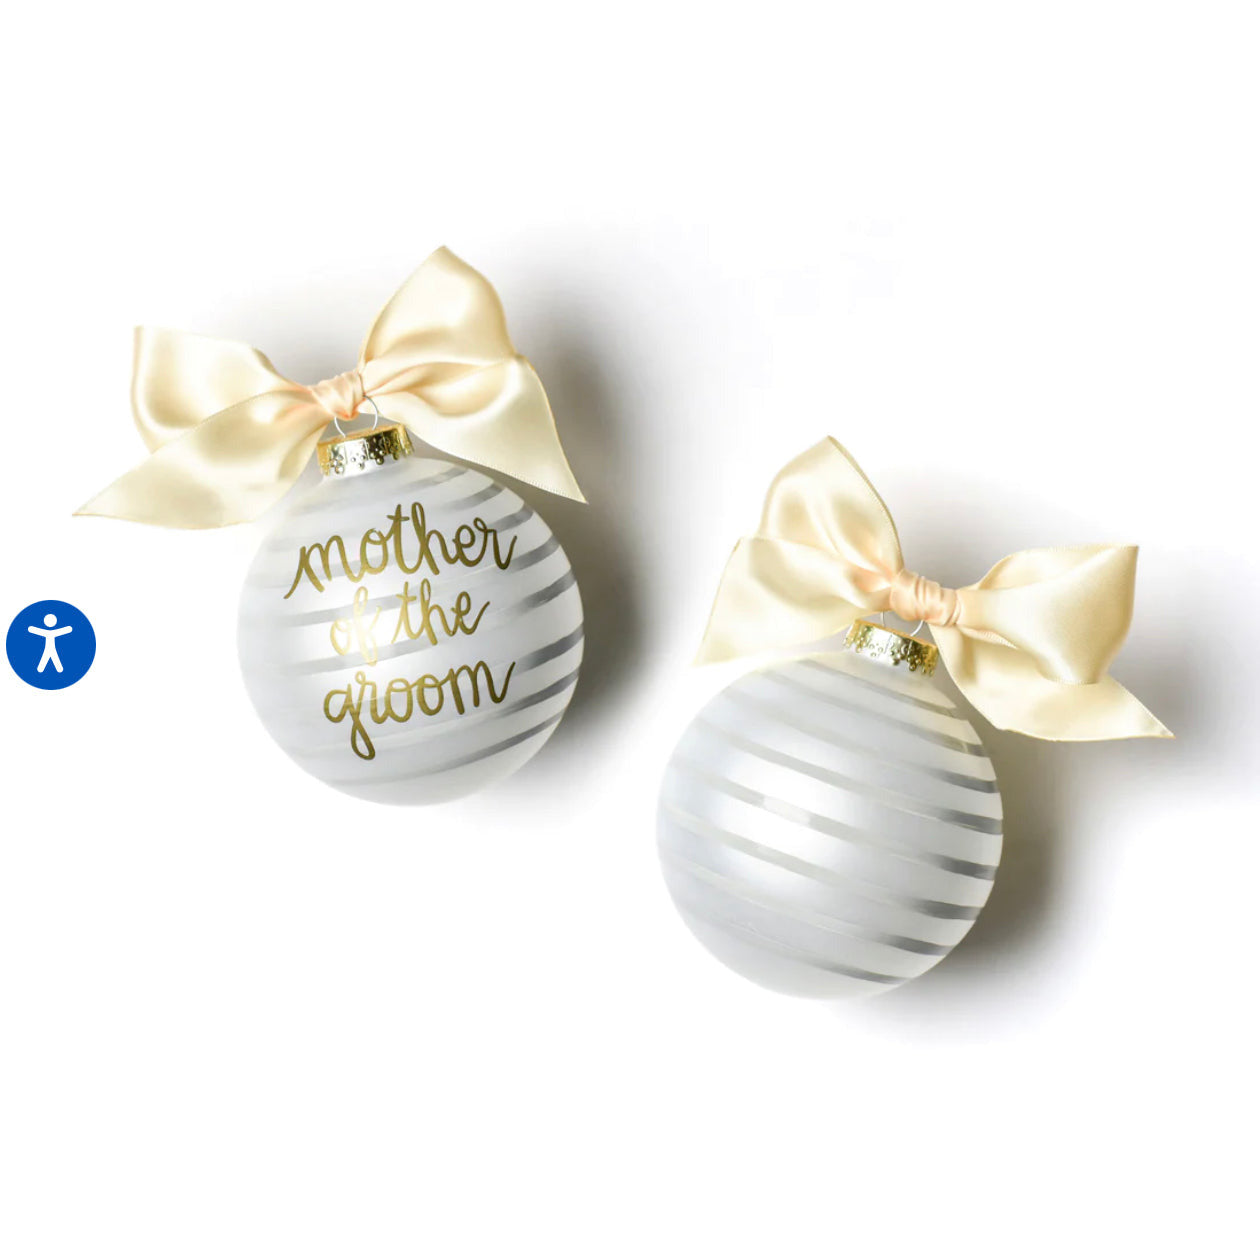 Mother Of The Groom Ornament Coton Colors